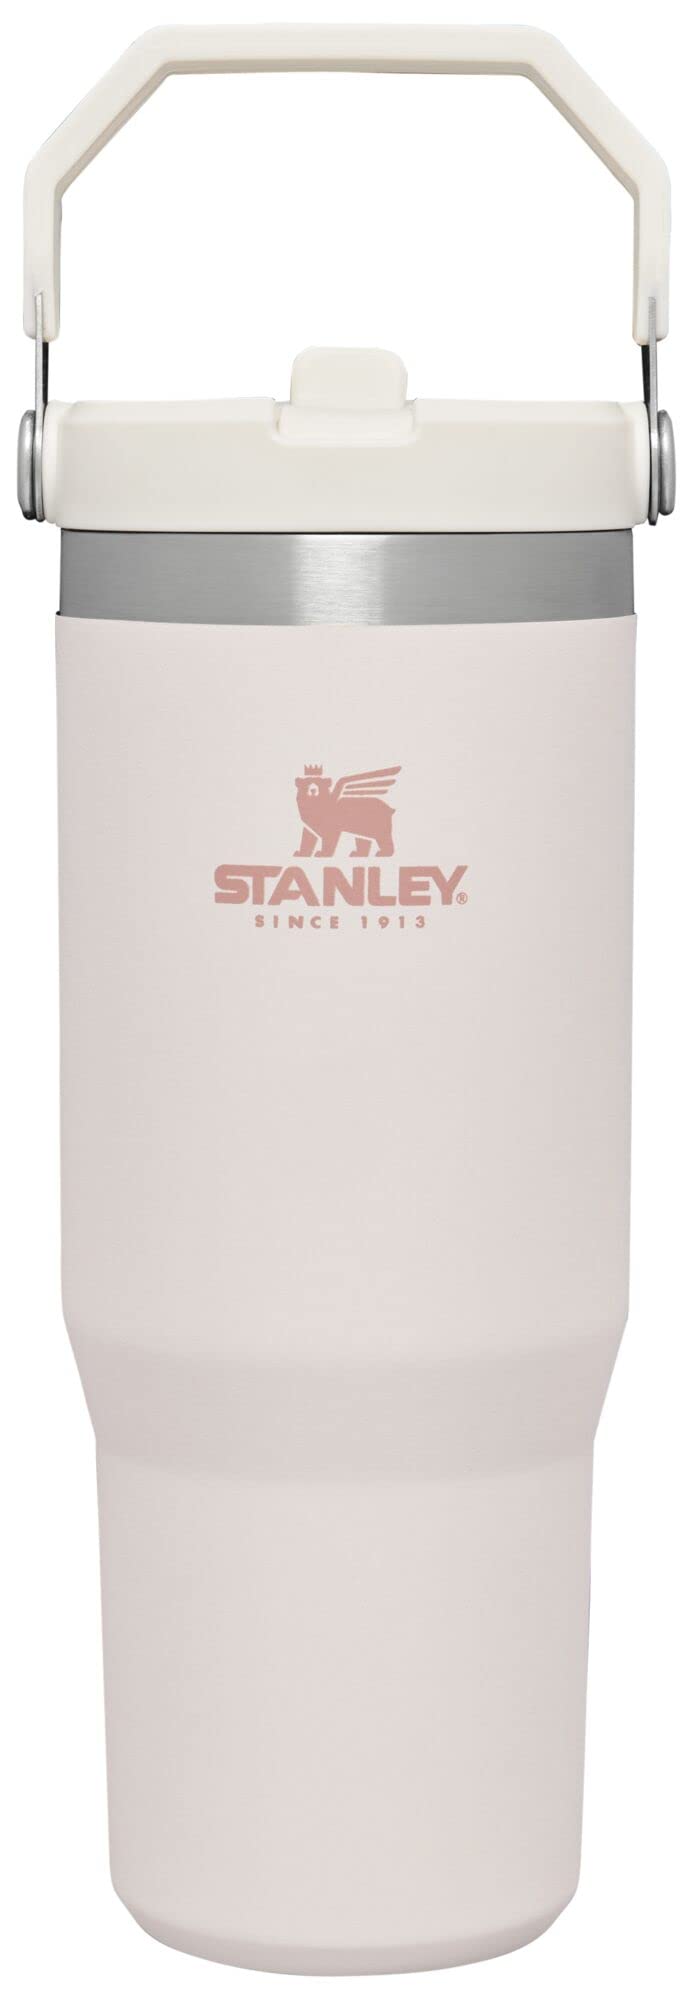 Stanley IceFlow Stainless Steel Tumbler with Straw - Vacuum Insulated Water Bottle for Home, Office or Car - Reusable Cup with Straw Leakproof Flip - Cold for 12 Hrs or Iced for 2 Days (Rose Quartz)